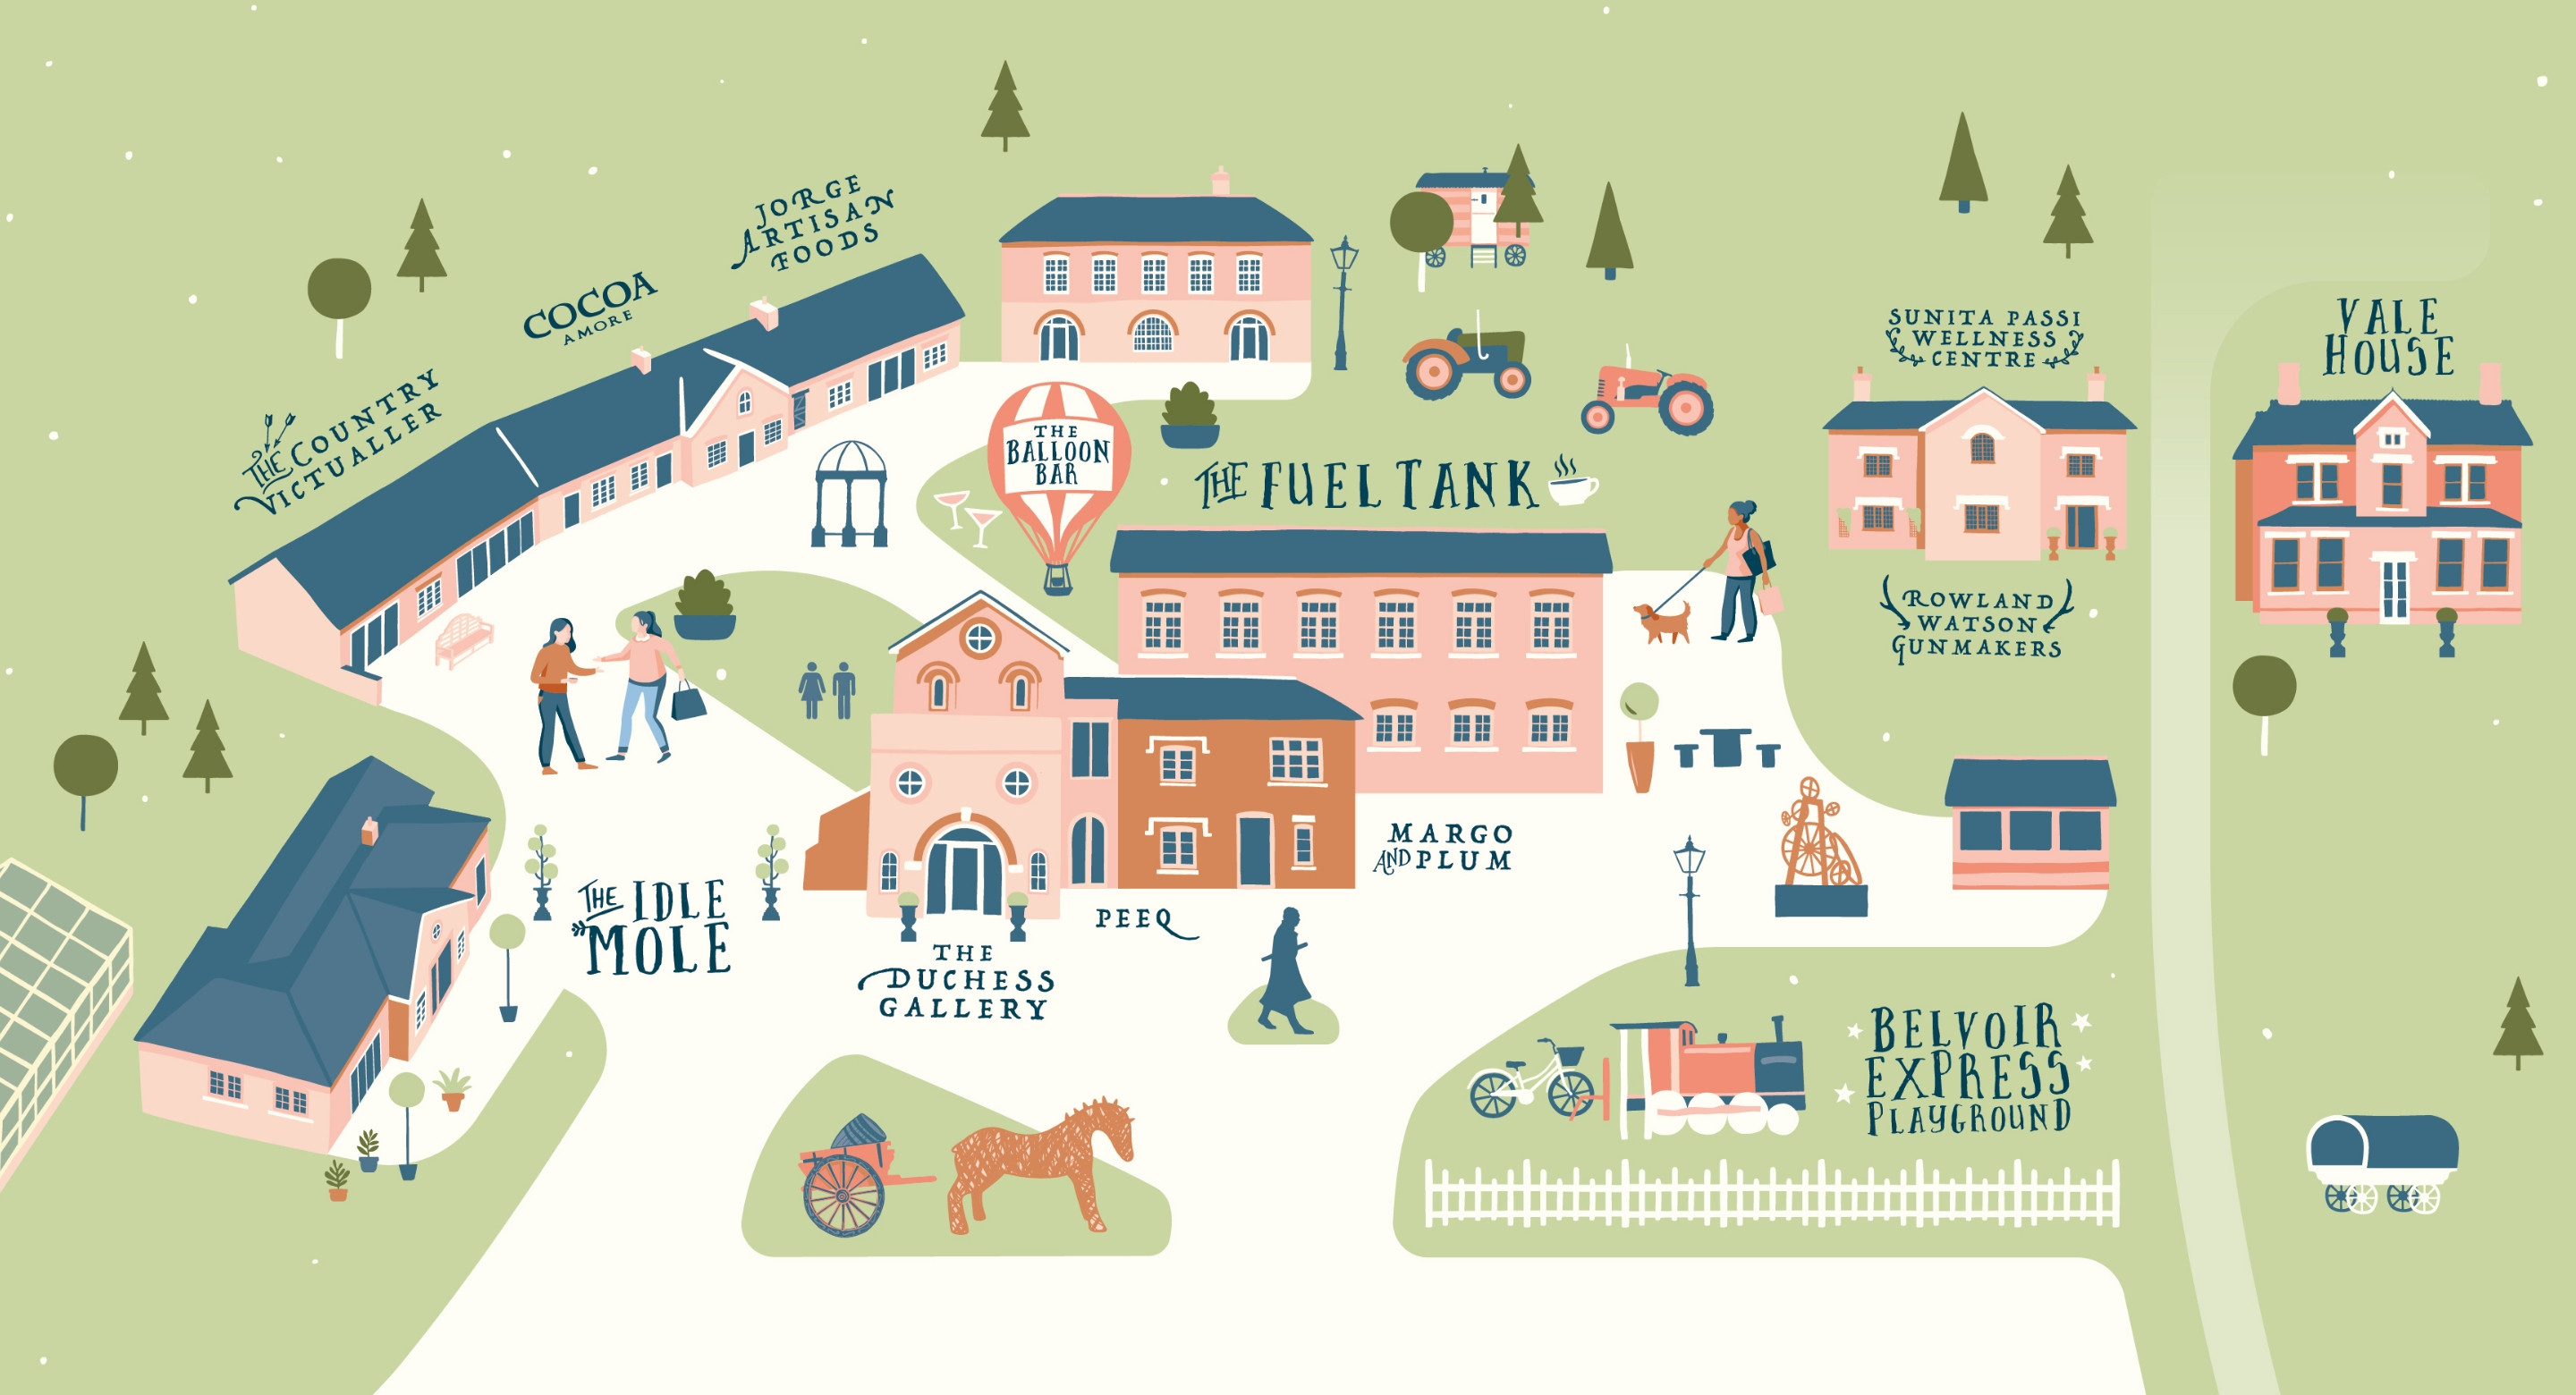 Belvoir Engine Yard shopping village illustrated map by Root Studio